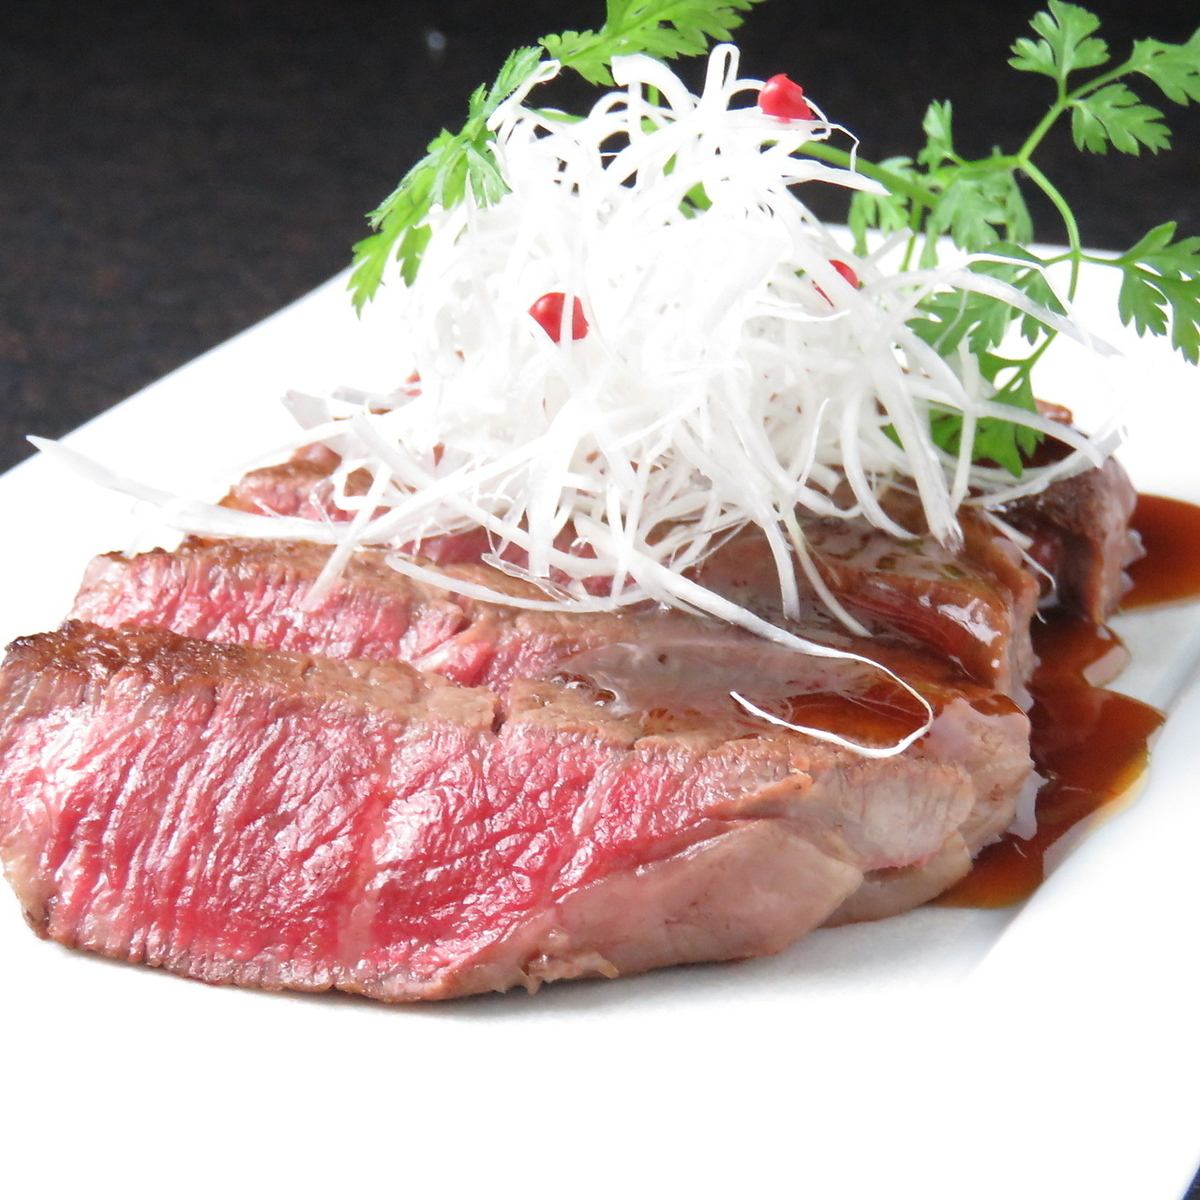 150g fillet steak and 6 other courses for 10,000 yen (tax included)